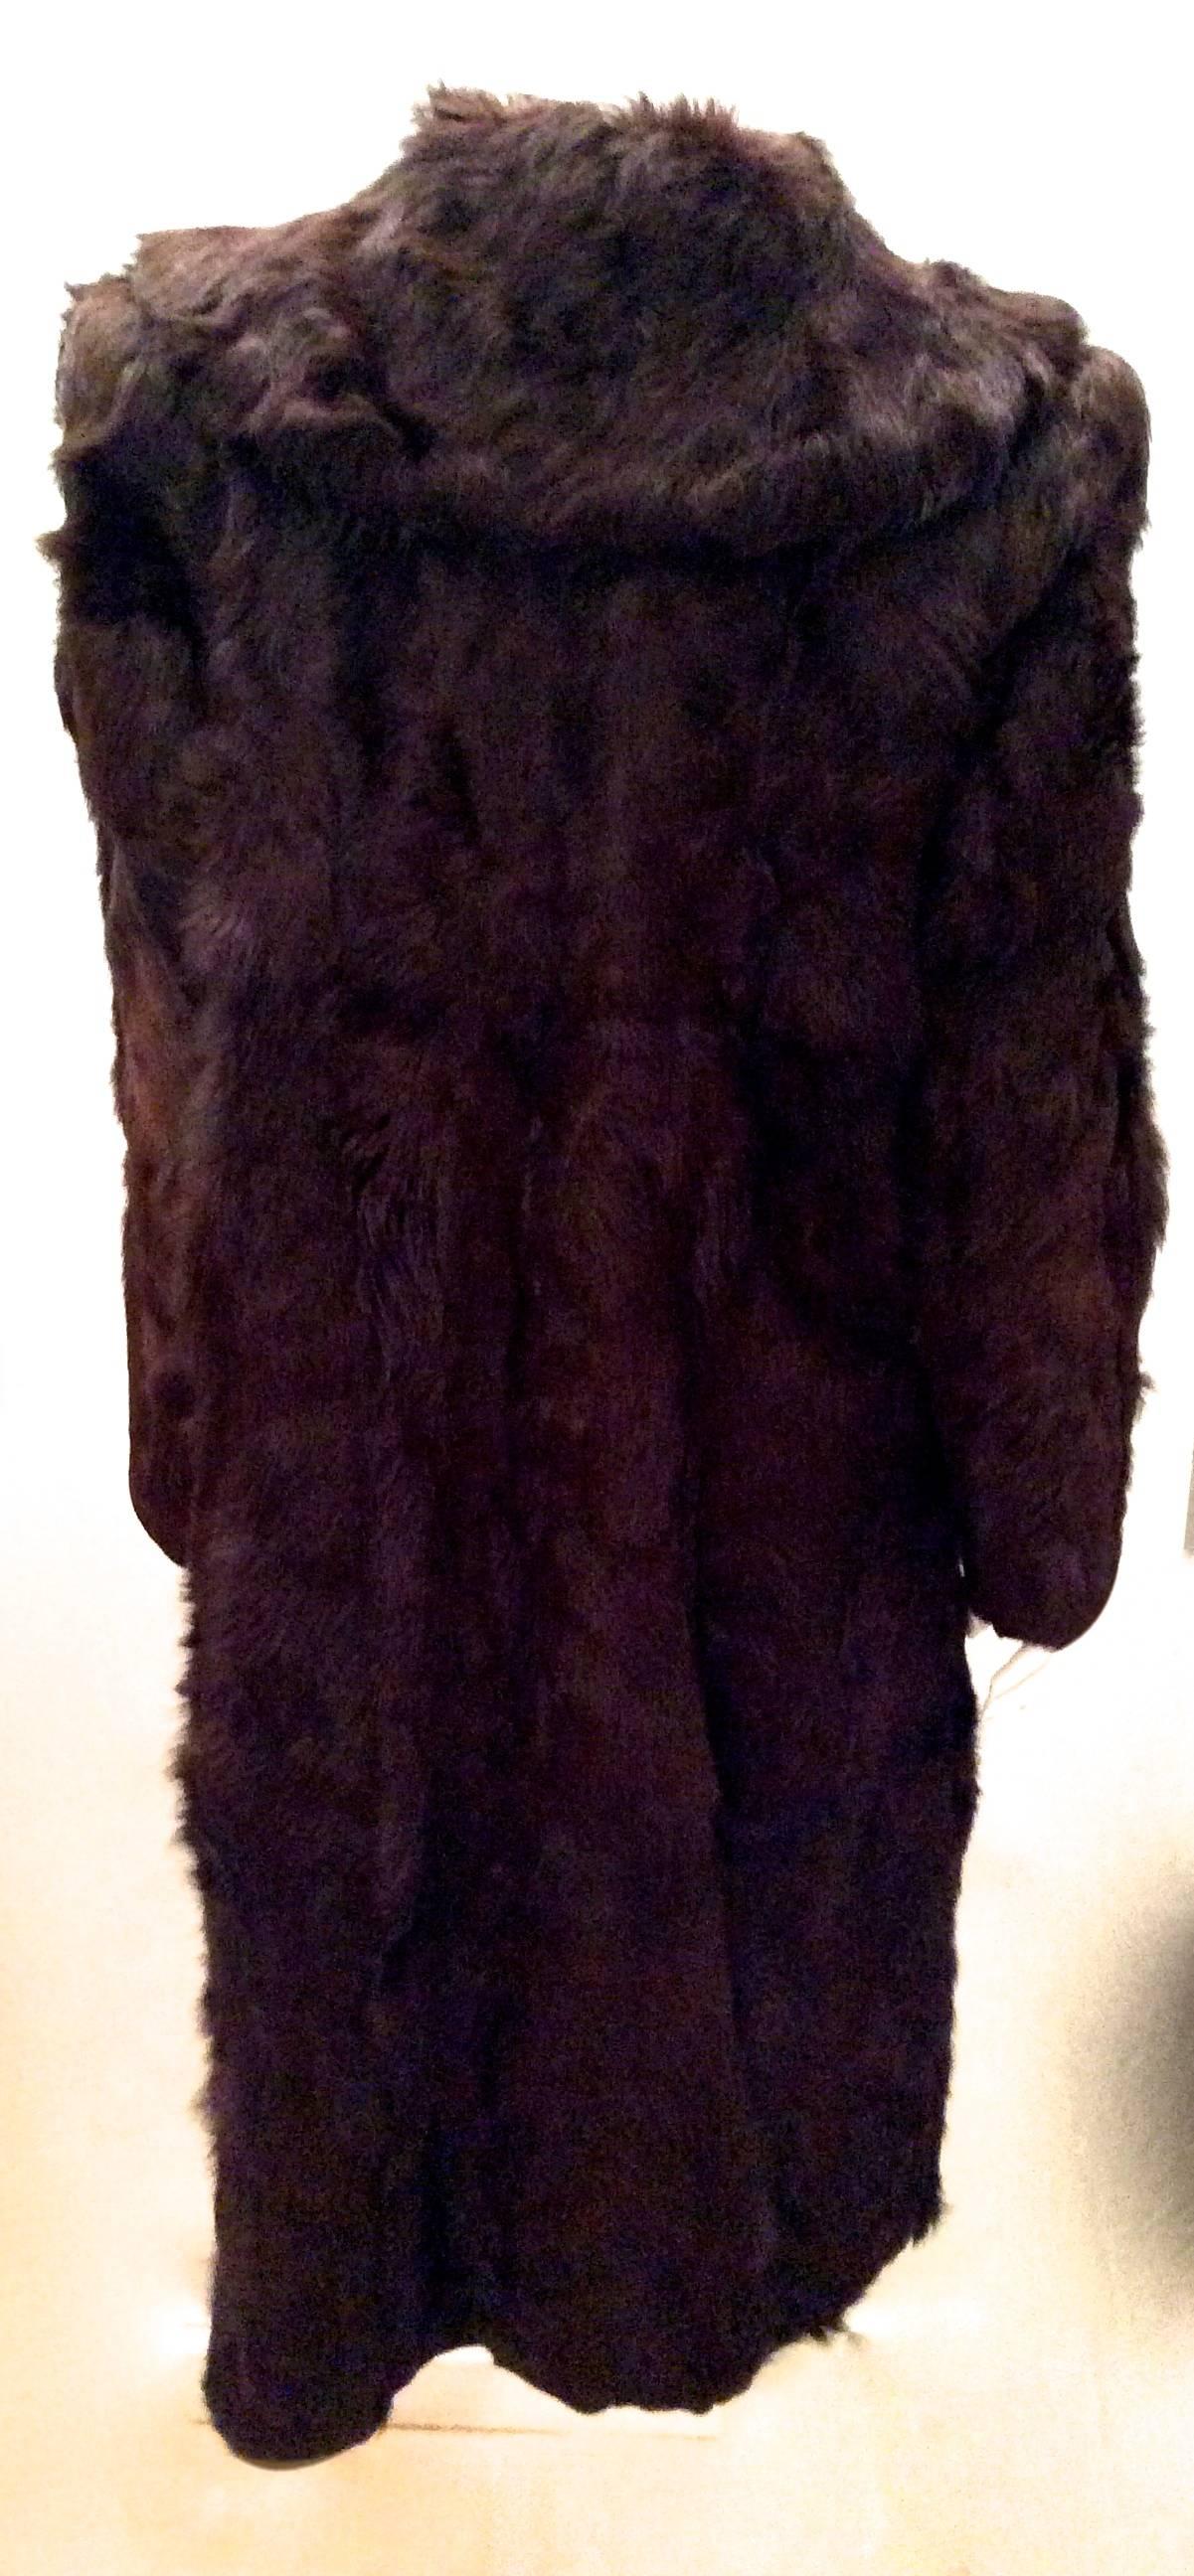 Chocolate Brown Full Length Fur Coat 6 / 8 In Good Condition For Sale In Boca Raton, FL